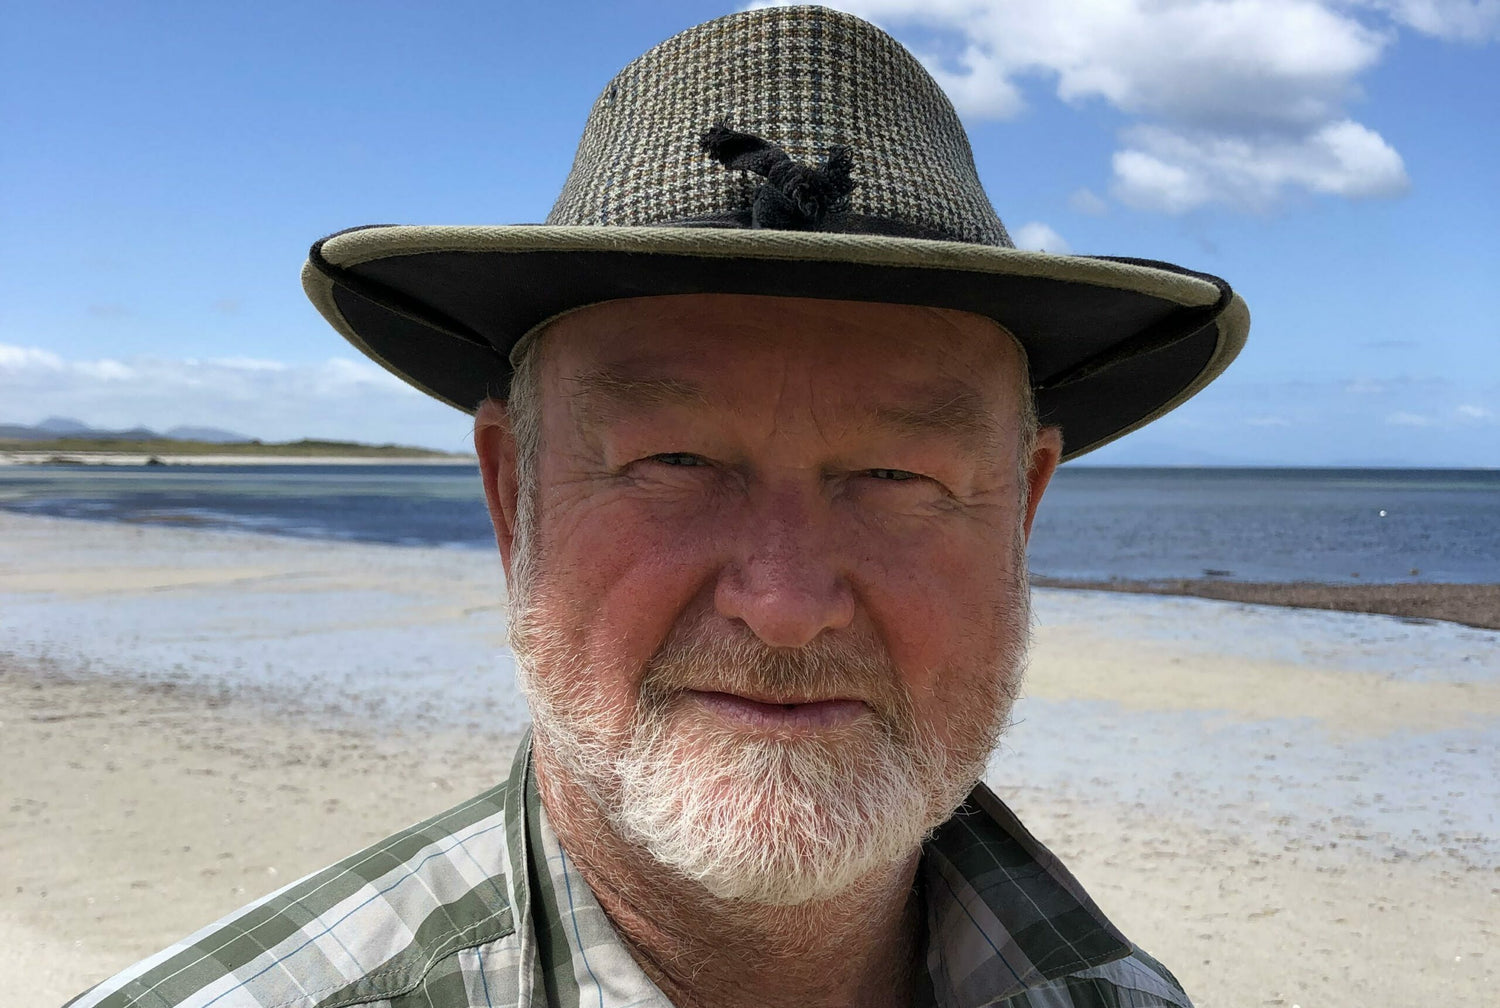 Image of John Kean, he is wearing a hat and has a white beard. The photo is taken by sea with beach and sea in the background.